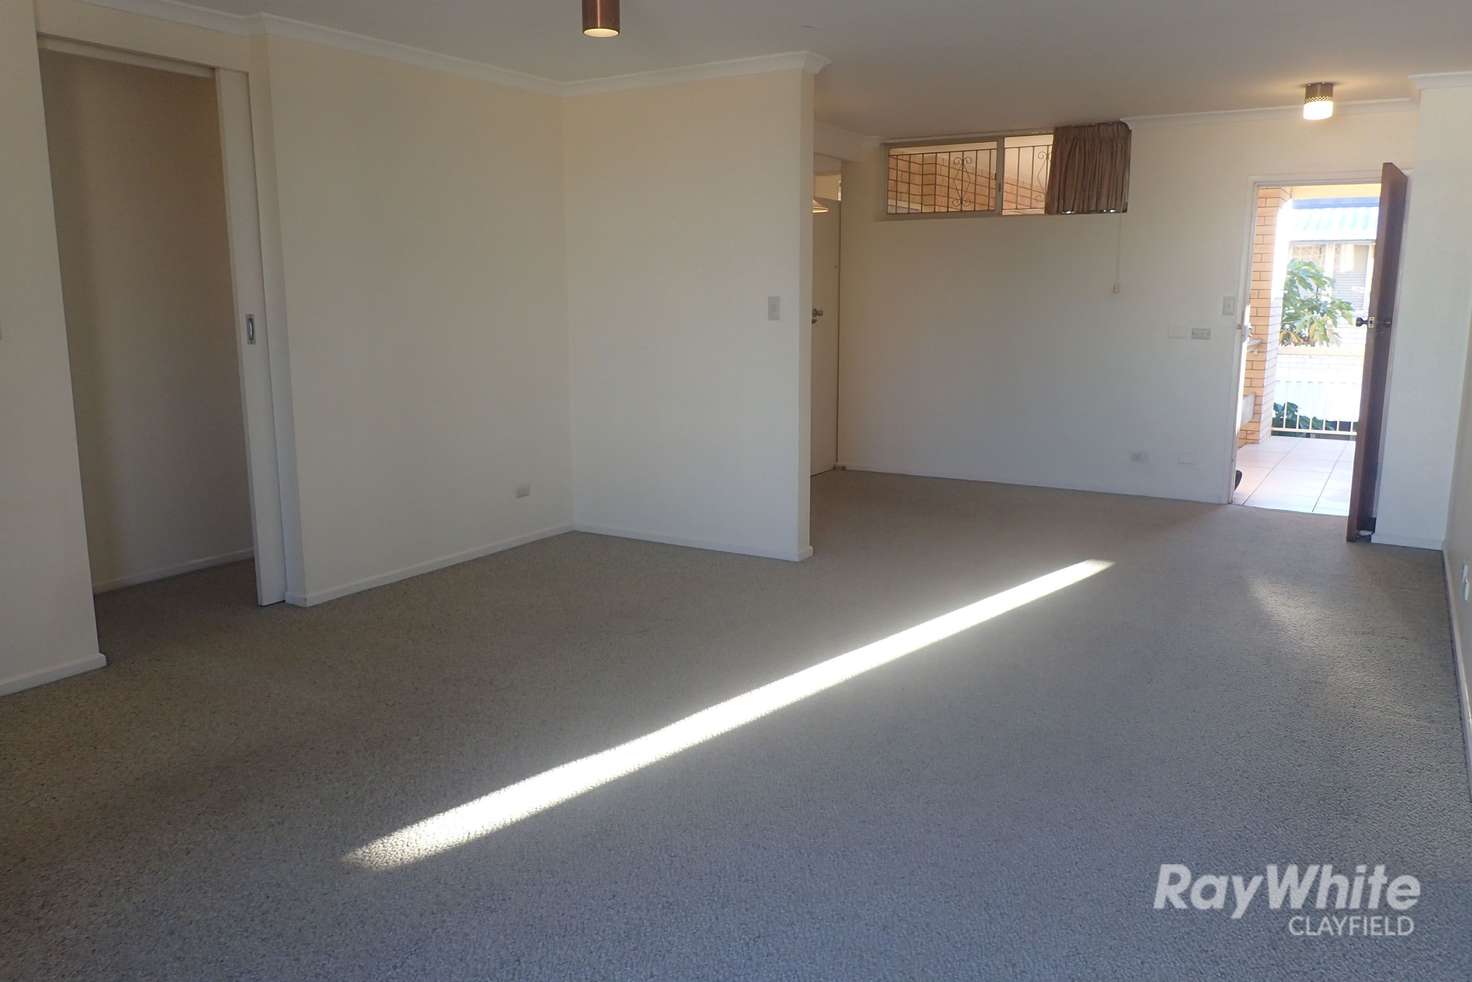 Main view of Homely unit listing, 6/41 Reeve Street, Clayfield QLD 4011